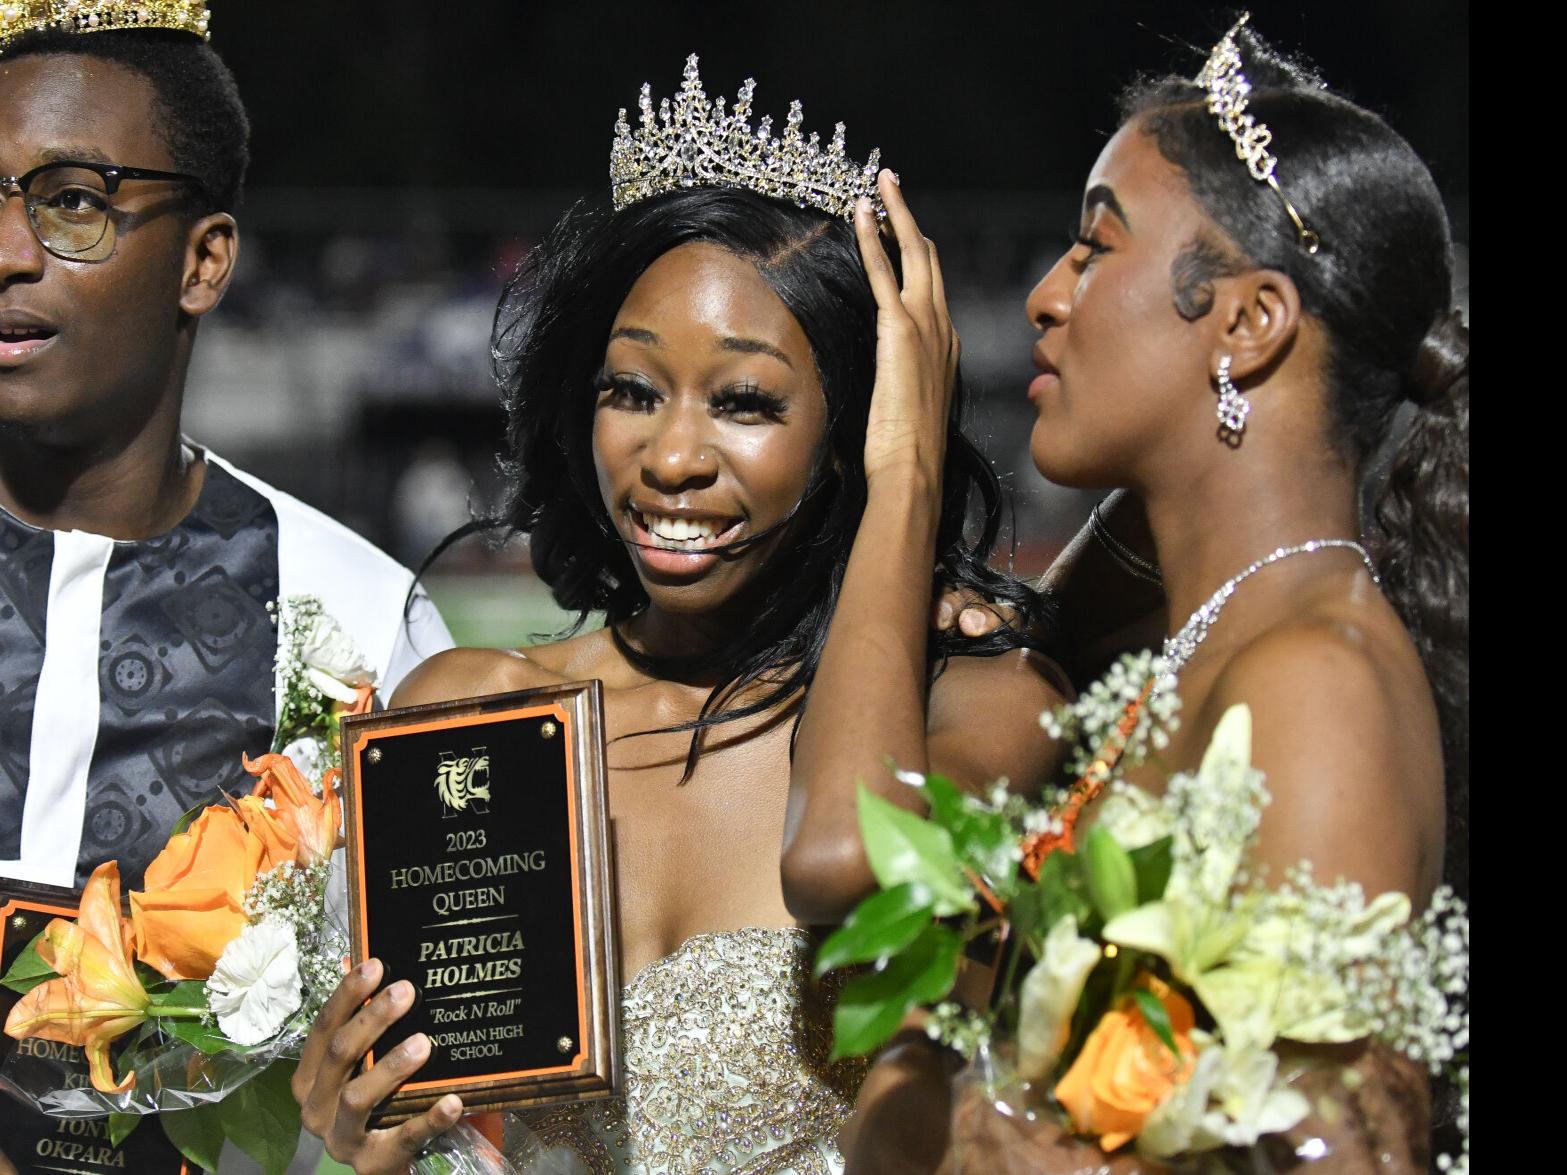 Black students reflect on Norman High Homecoming Court, News